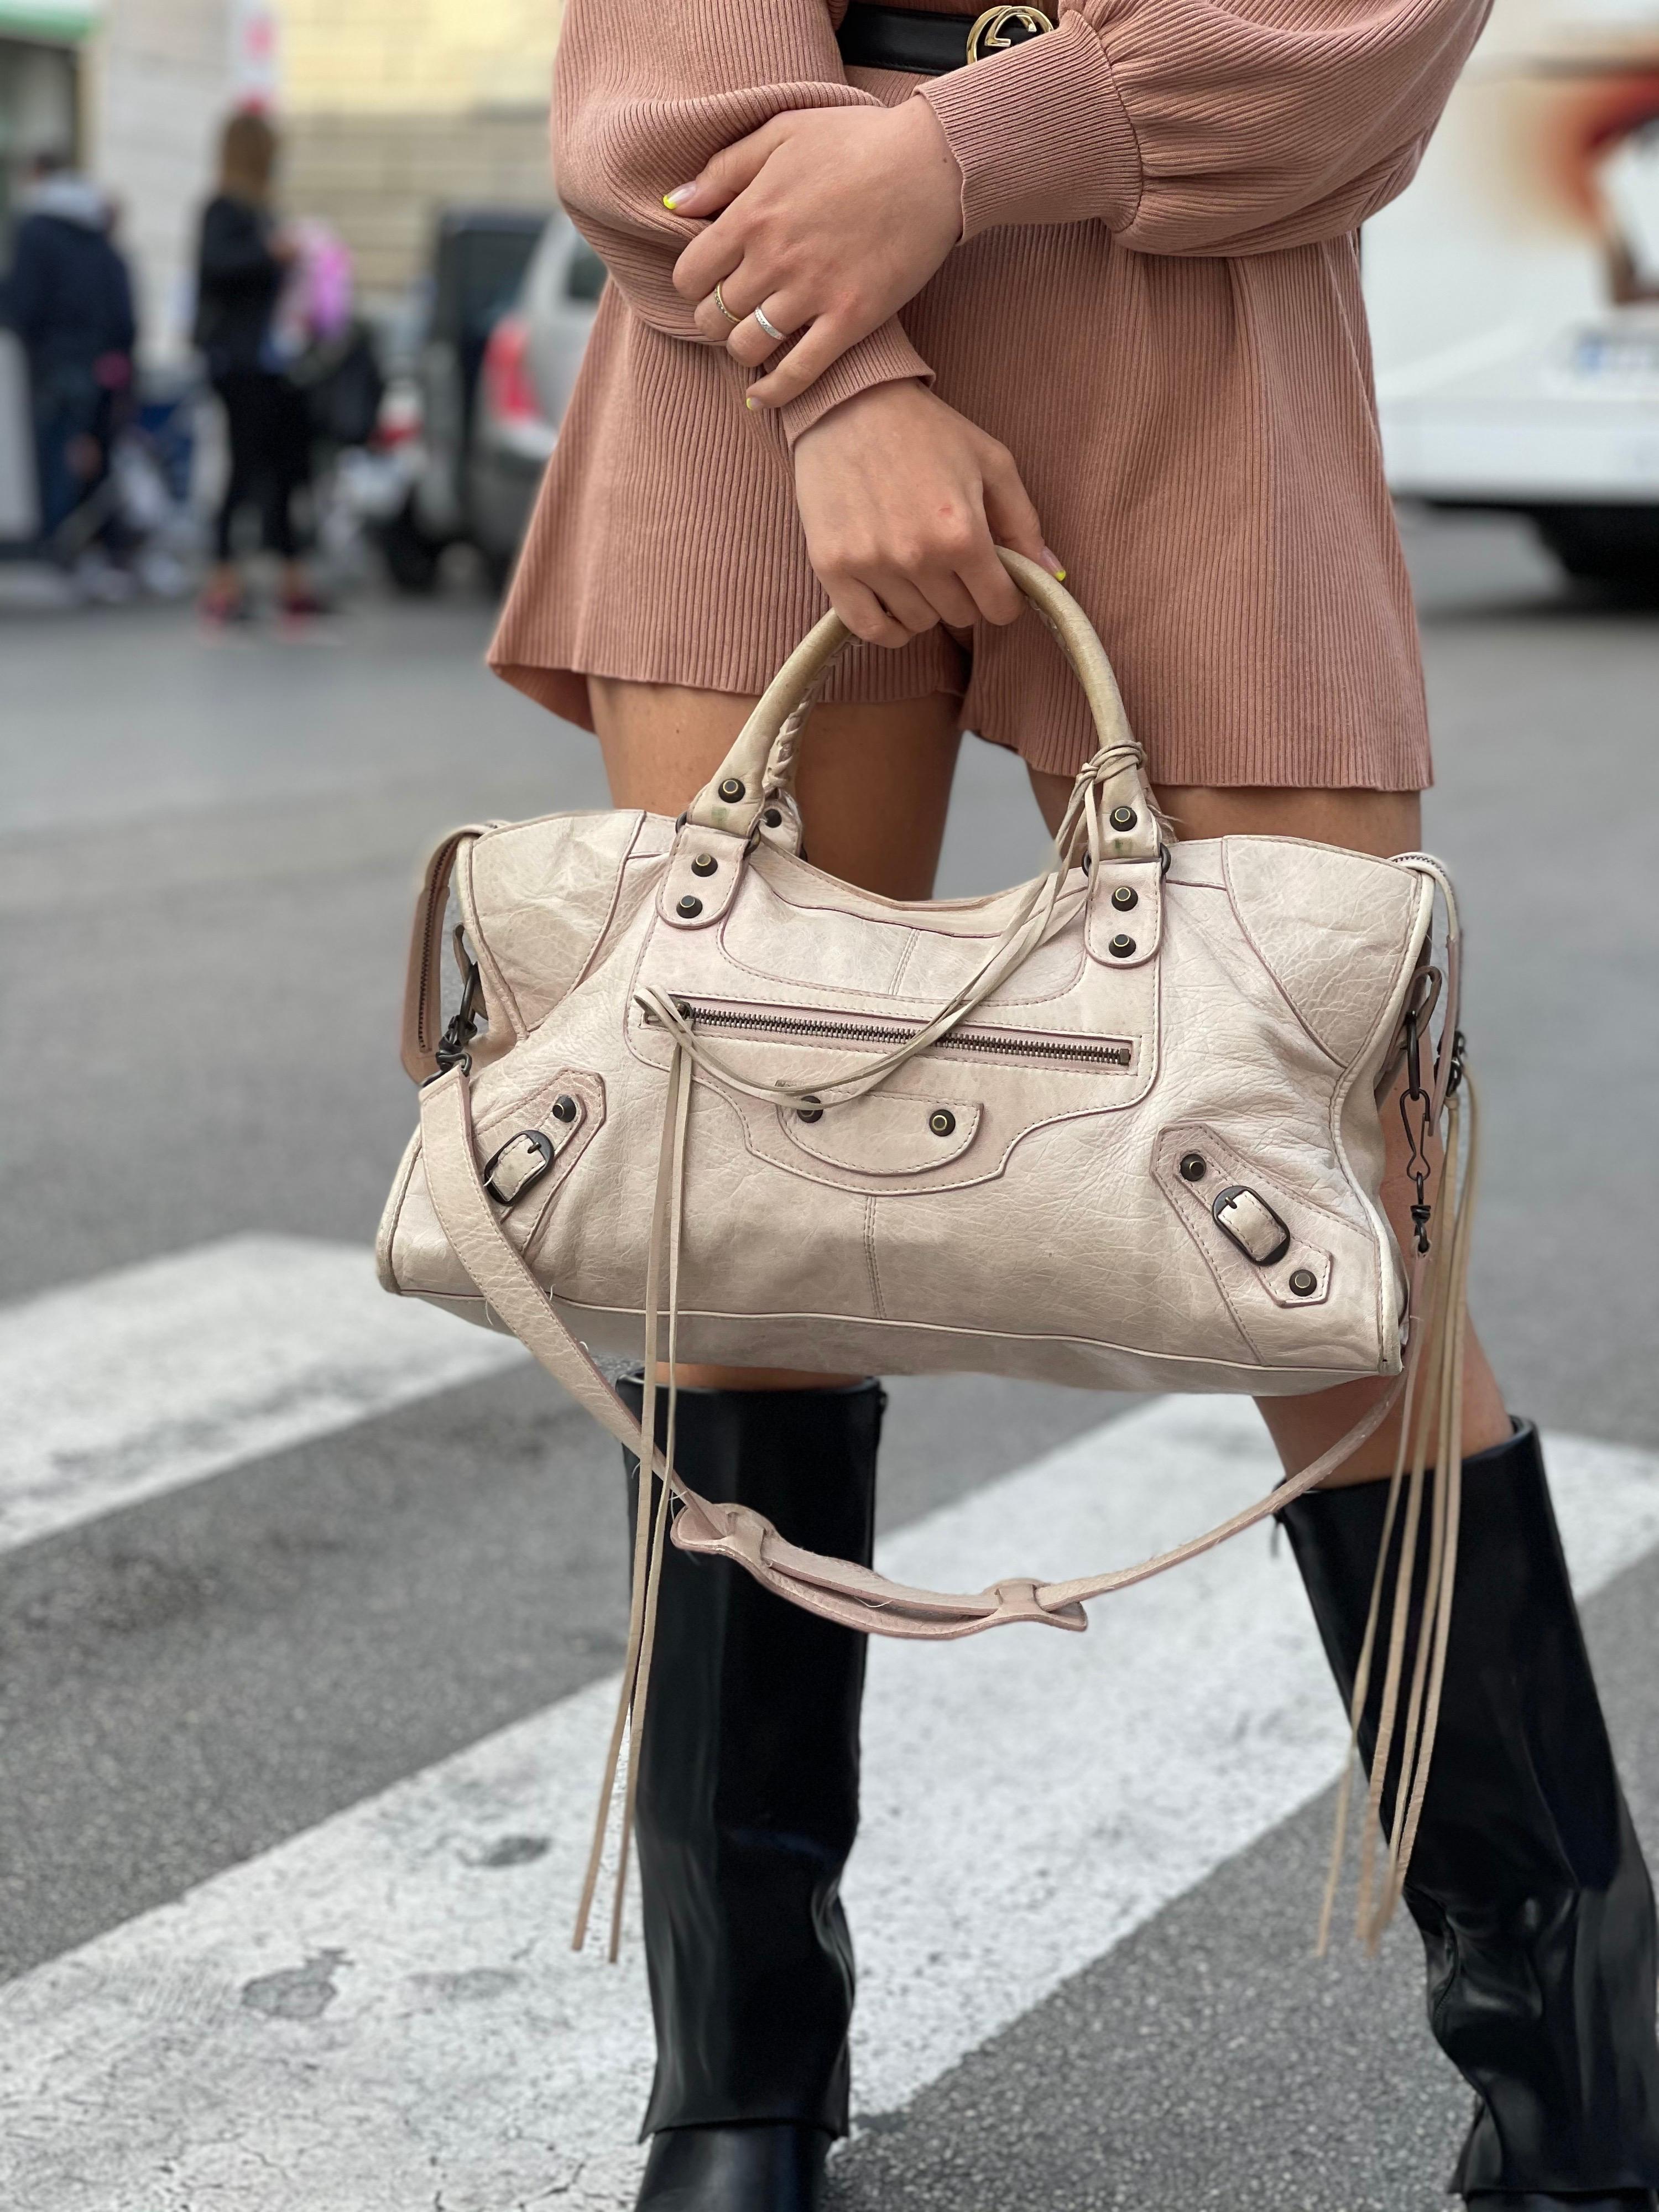 Balenciaga designer bag crafted in beige leather with black hardware.
Zip closure, very large inside. Equipped with double leather handle and shoulder strap. The bag is in good condition.